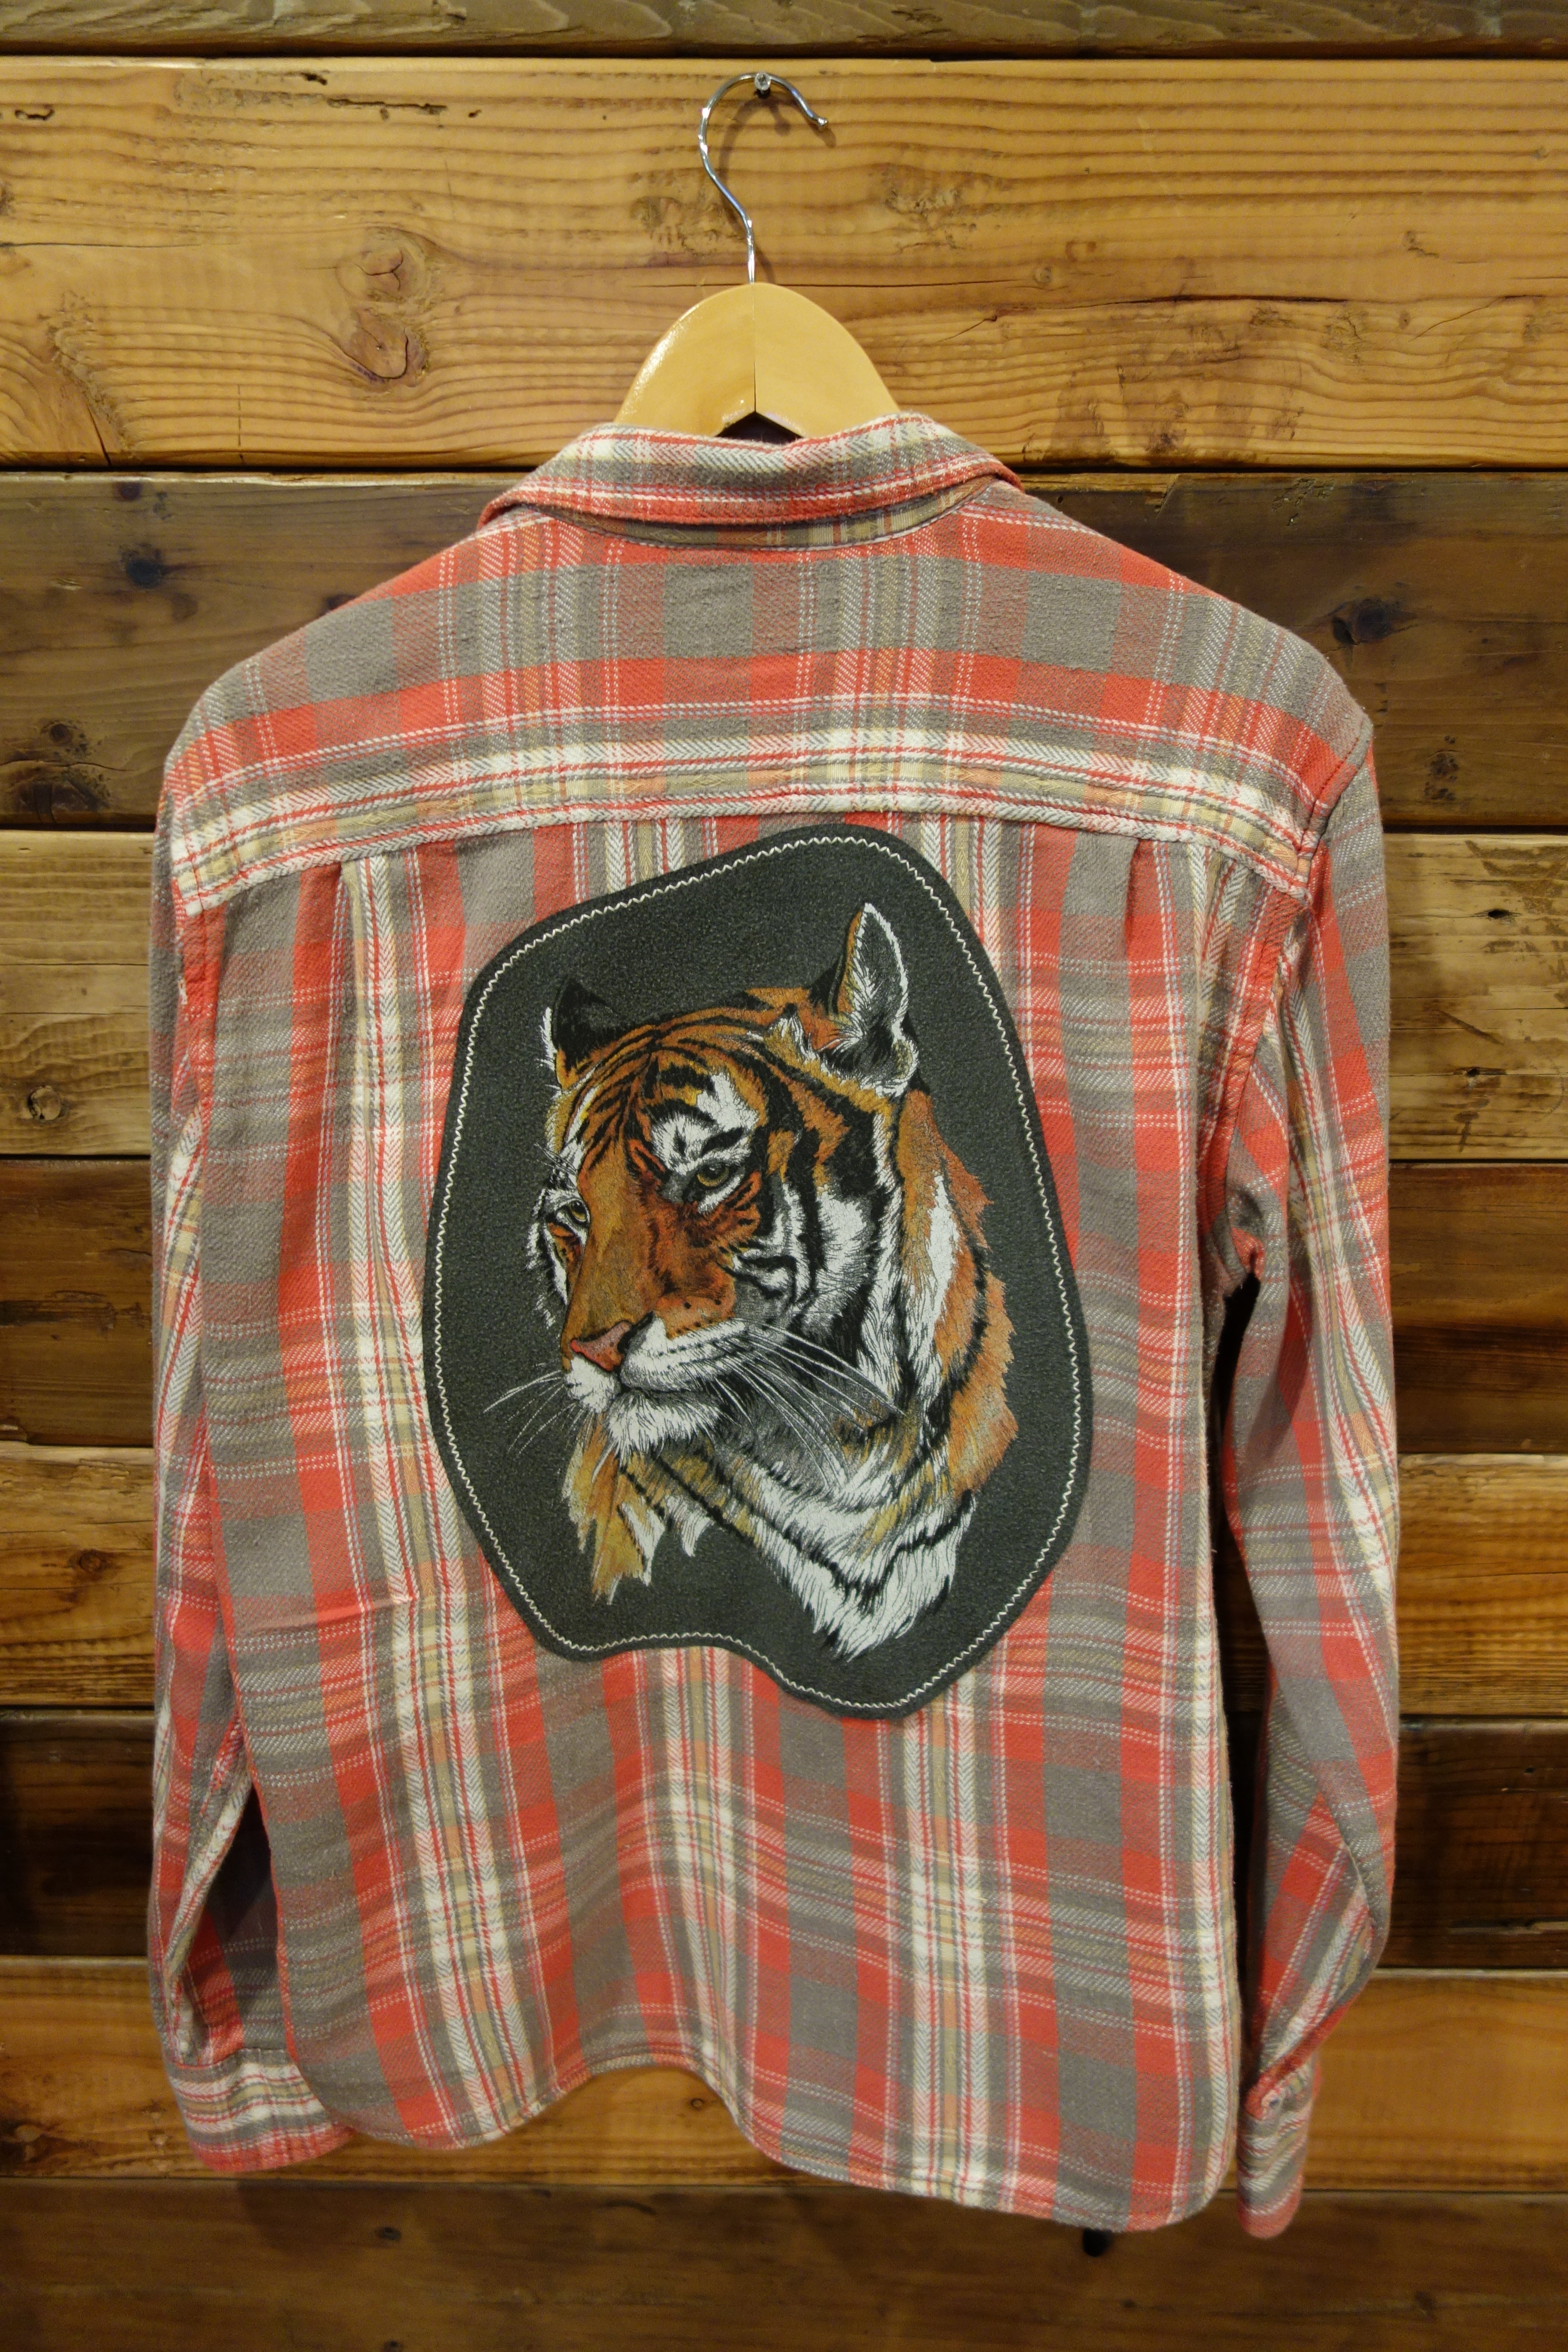 Vintage one-of-a-kind Lucky Brand flannel with tiger